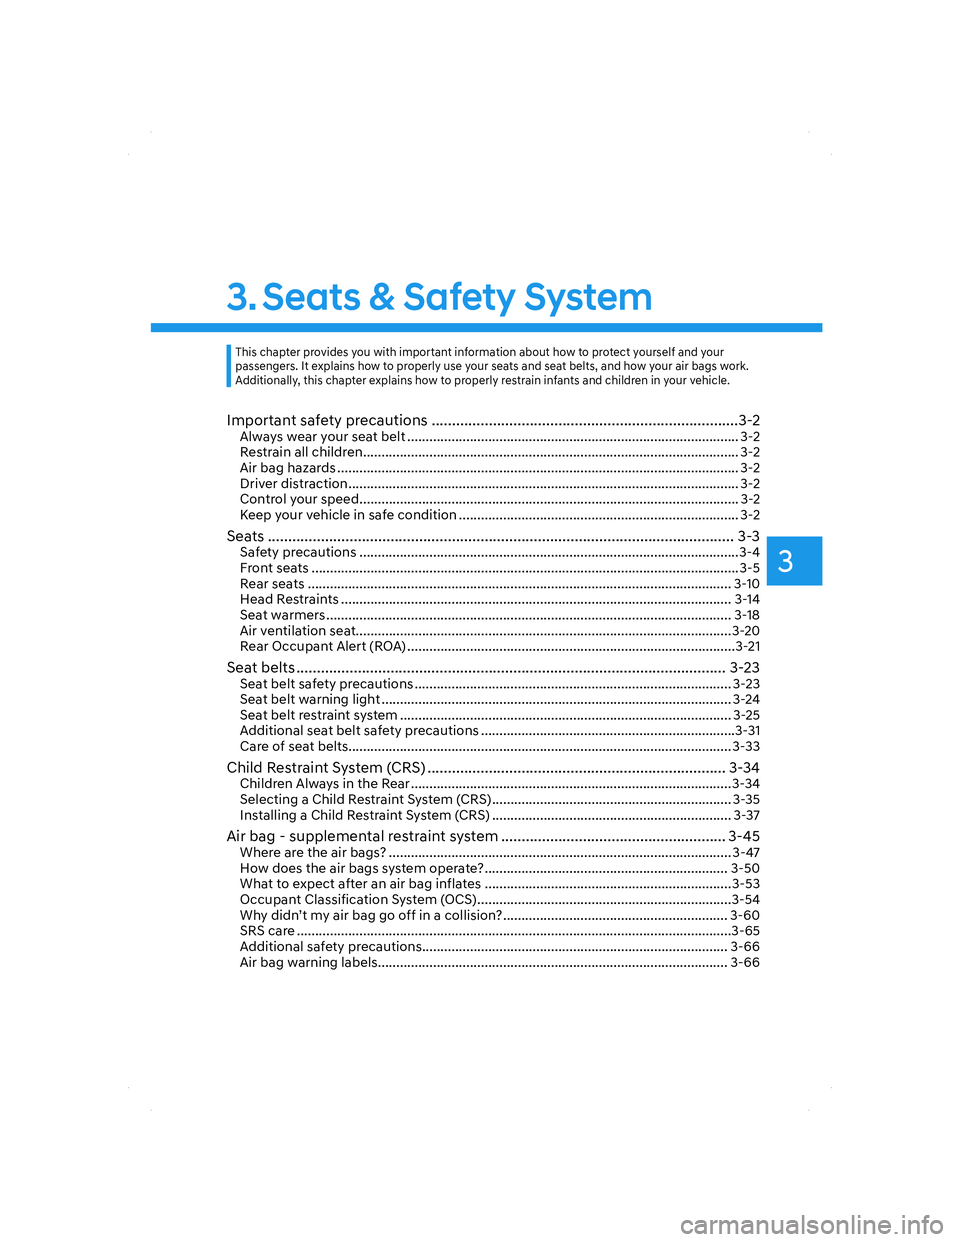 HYUNDAI SANTA FE 2022  Owners Manual 3
3. Seats & Safety System
Important safety precautions ...........................................................................3-2Always wear your seat belt .......................................